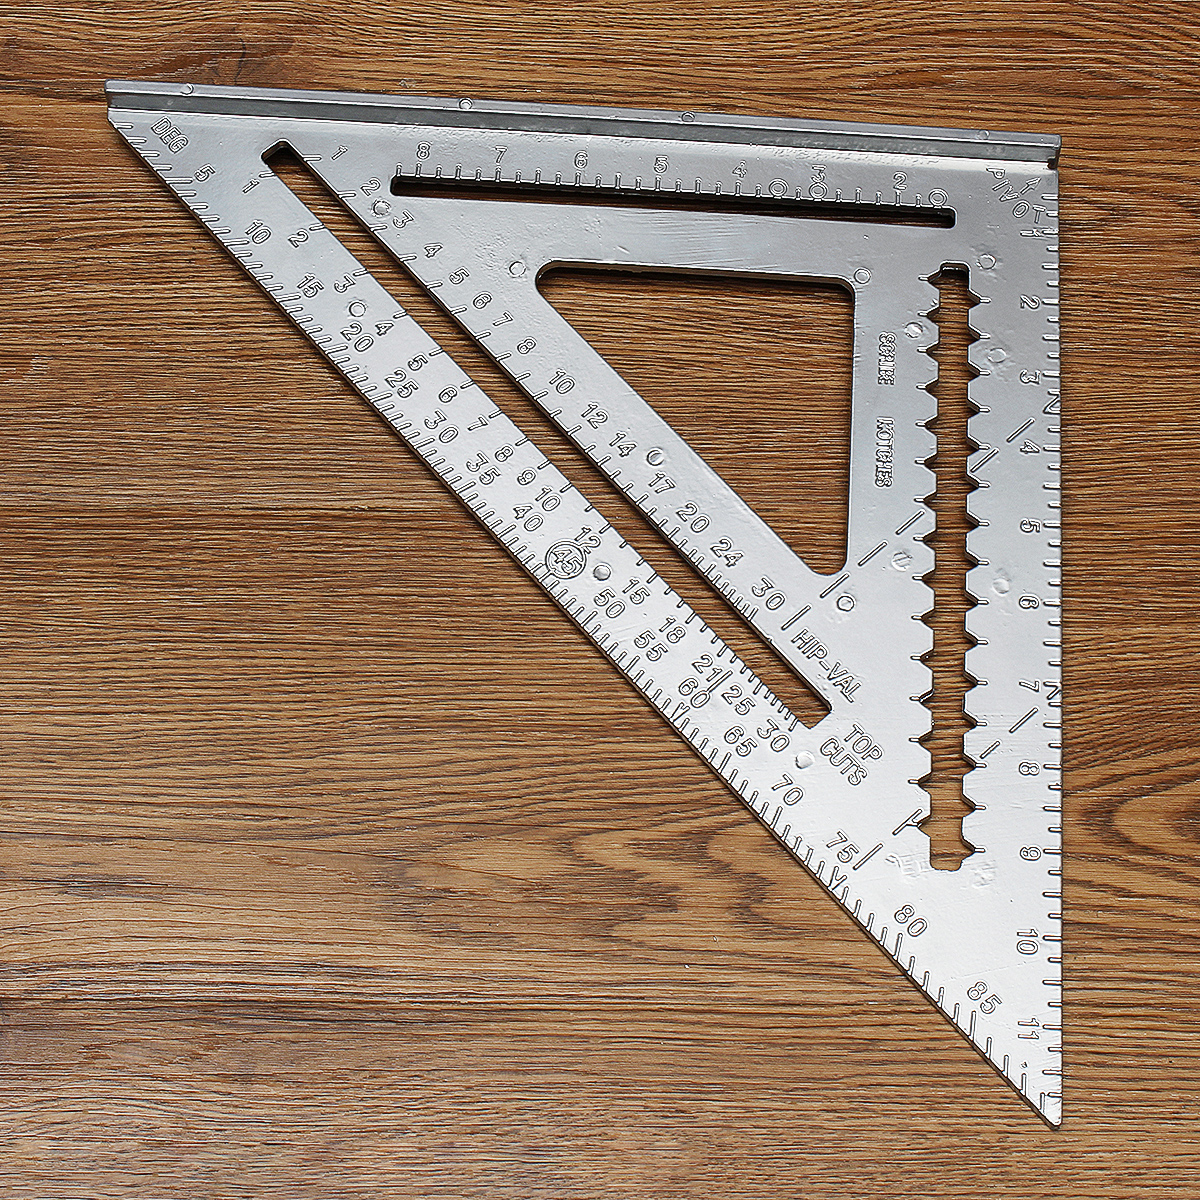 12inch-Aluminum-Alloy-Right-Angle-Triangle-Ruler-Protractor-Framing-Measuring-Tools-1597414-7